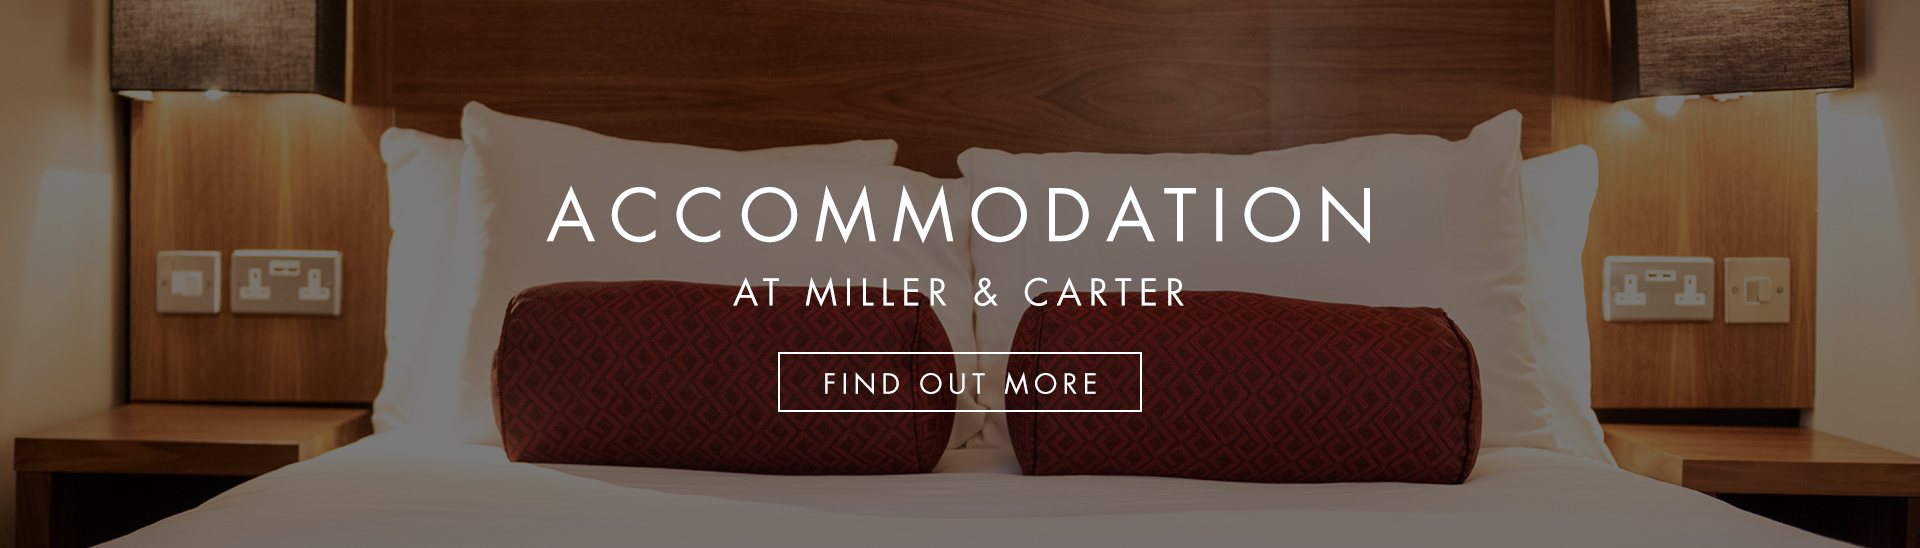 Accommodation at Miller & Carter Aughton